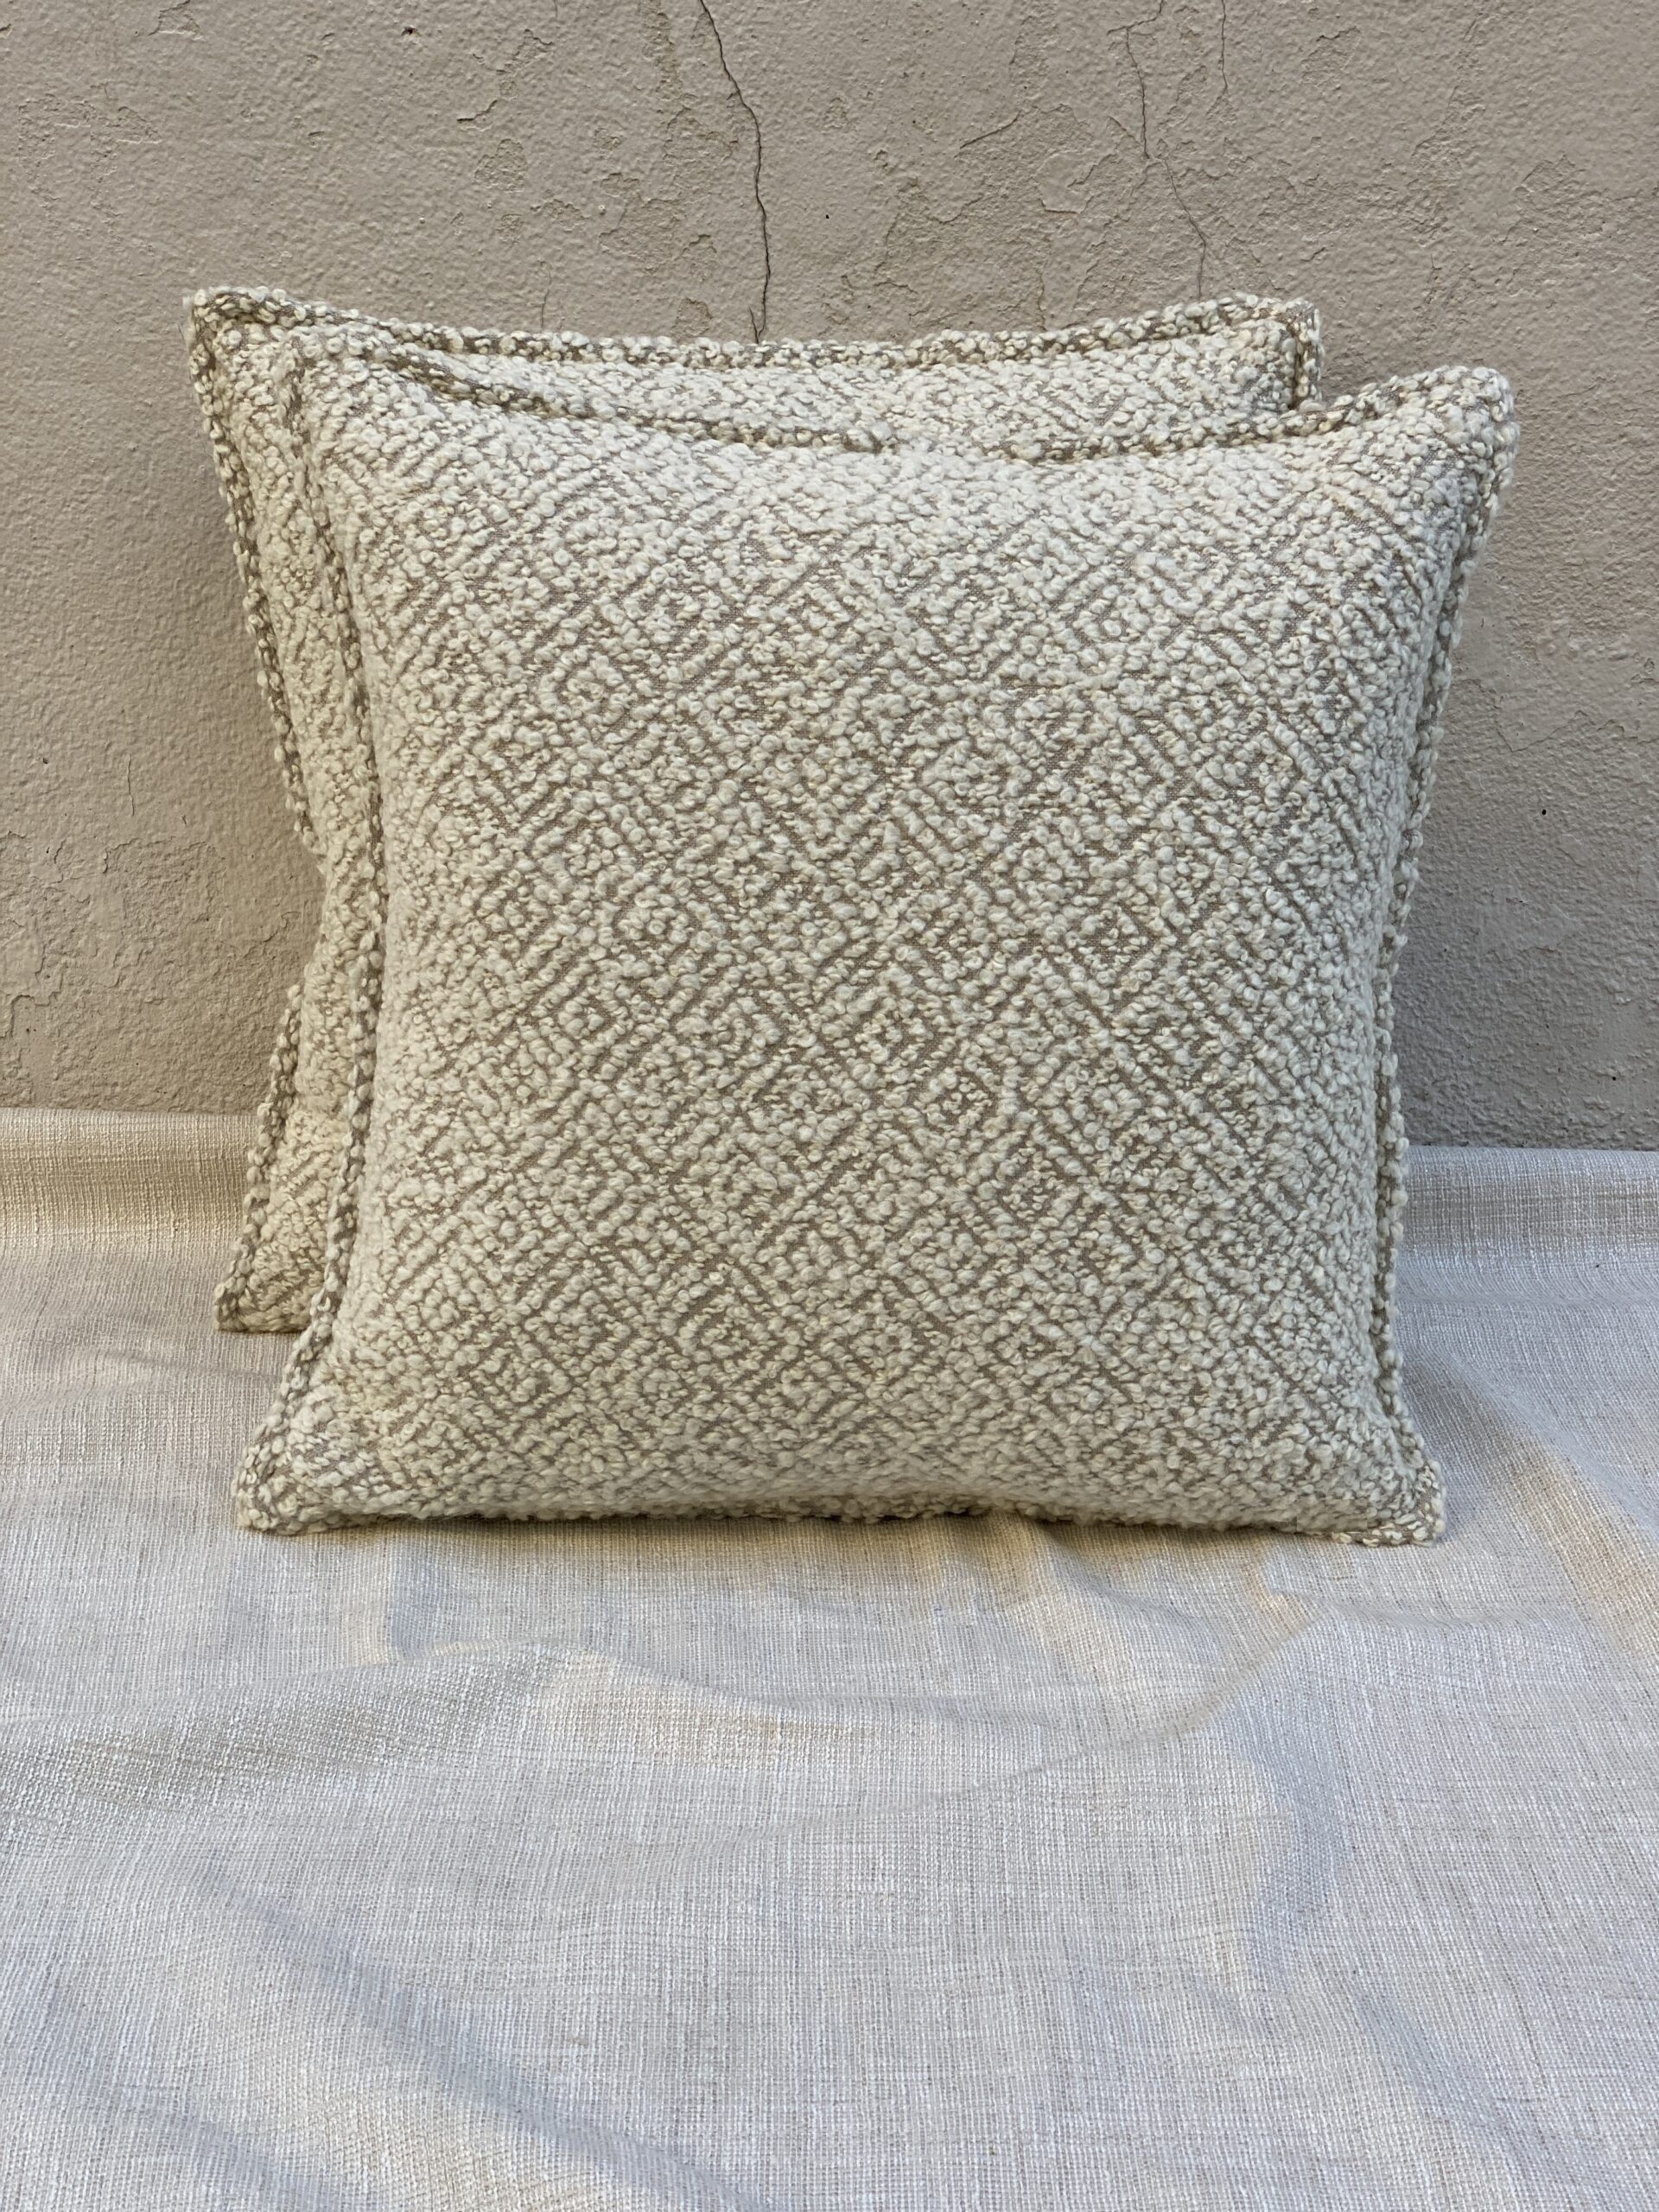 Holland & Sherry Chauvel Pillows